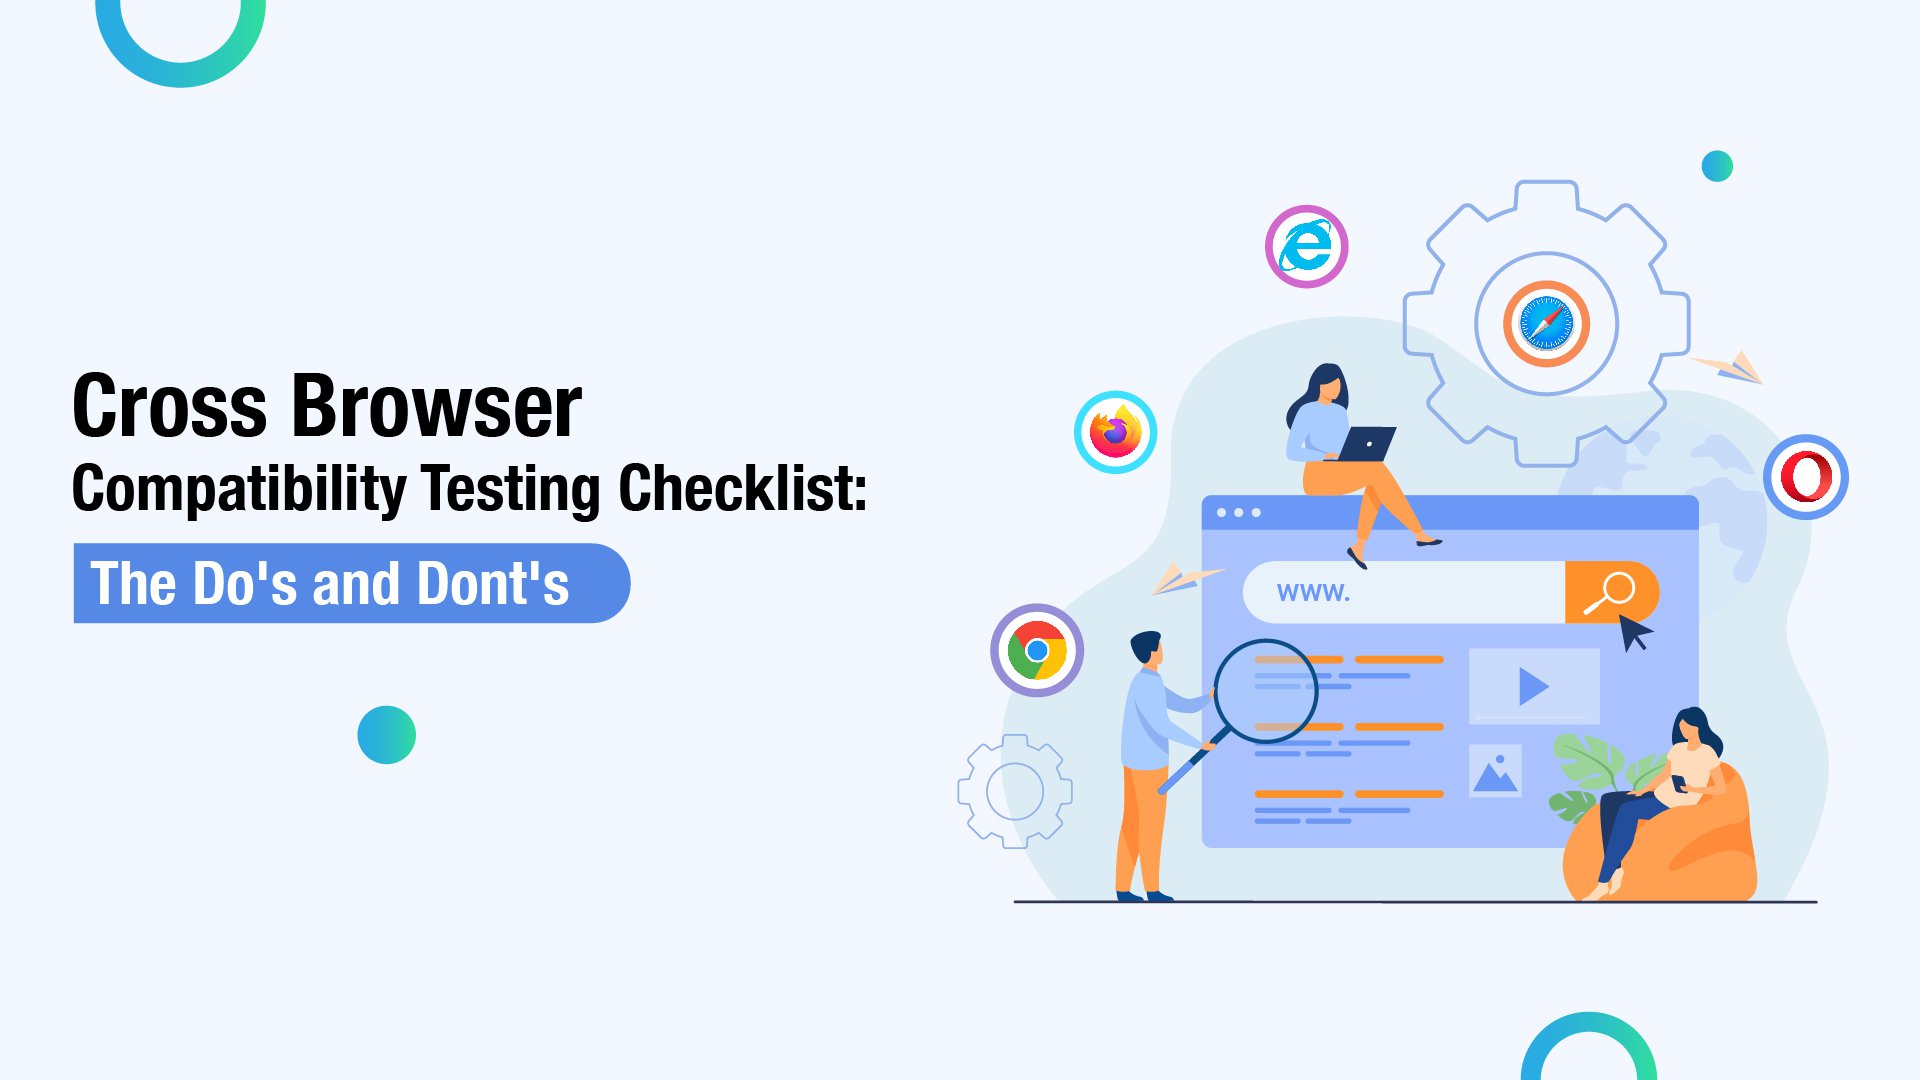 Cross Browser Compatibility Testing Checklist: The Do's and Dont's cover